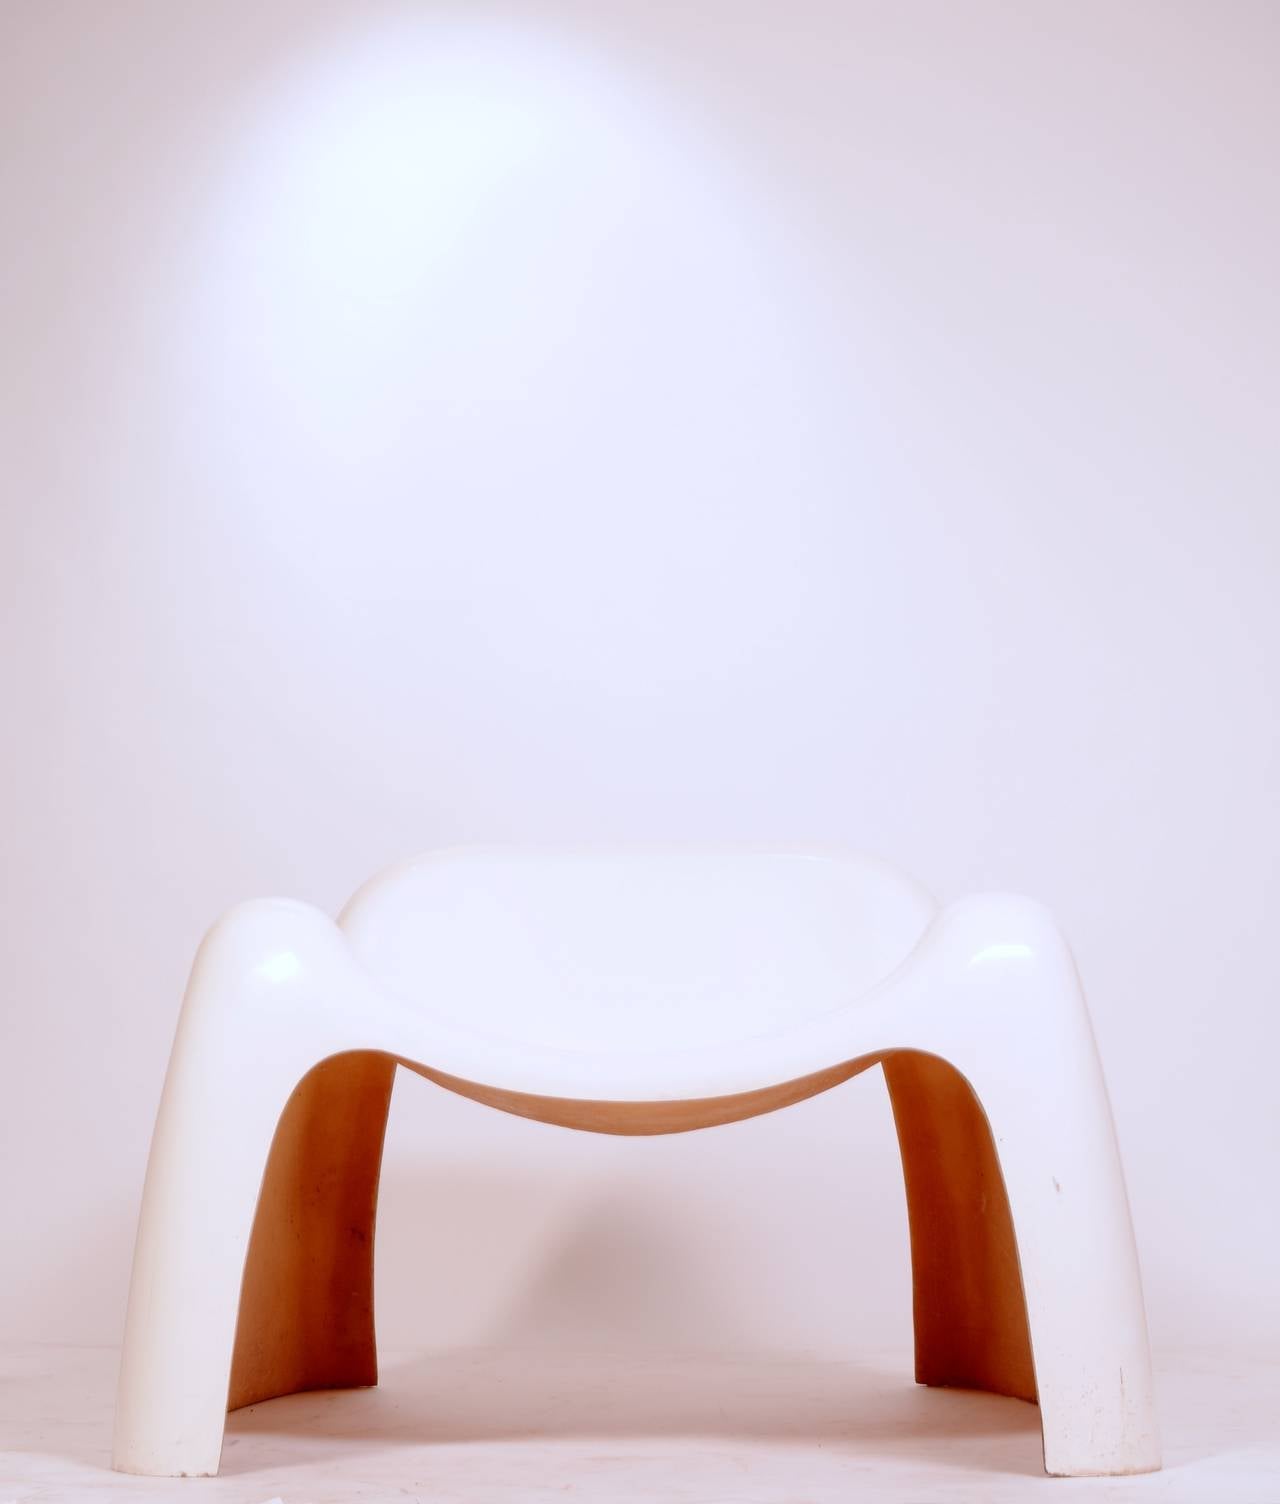 Toga Chair by Sergio Mazza for Artemide was designed in 1968.
Price is for the pair.